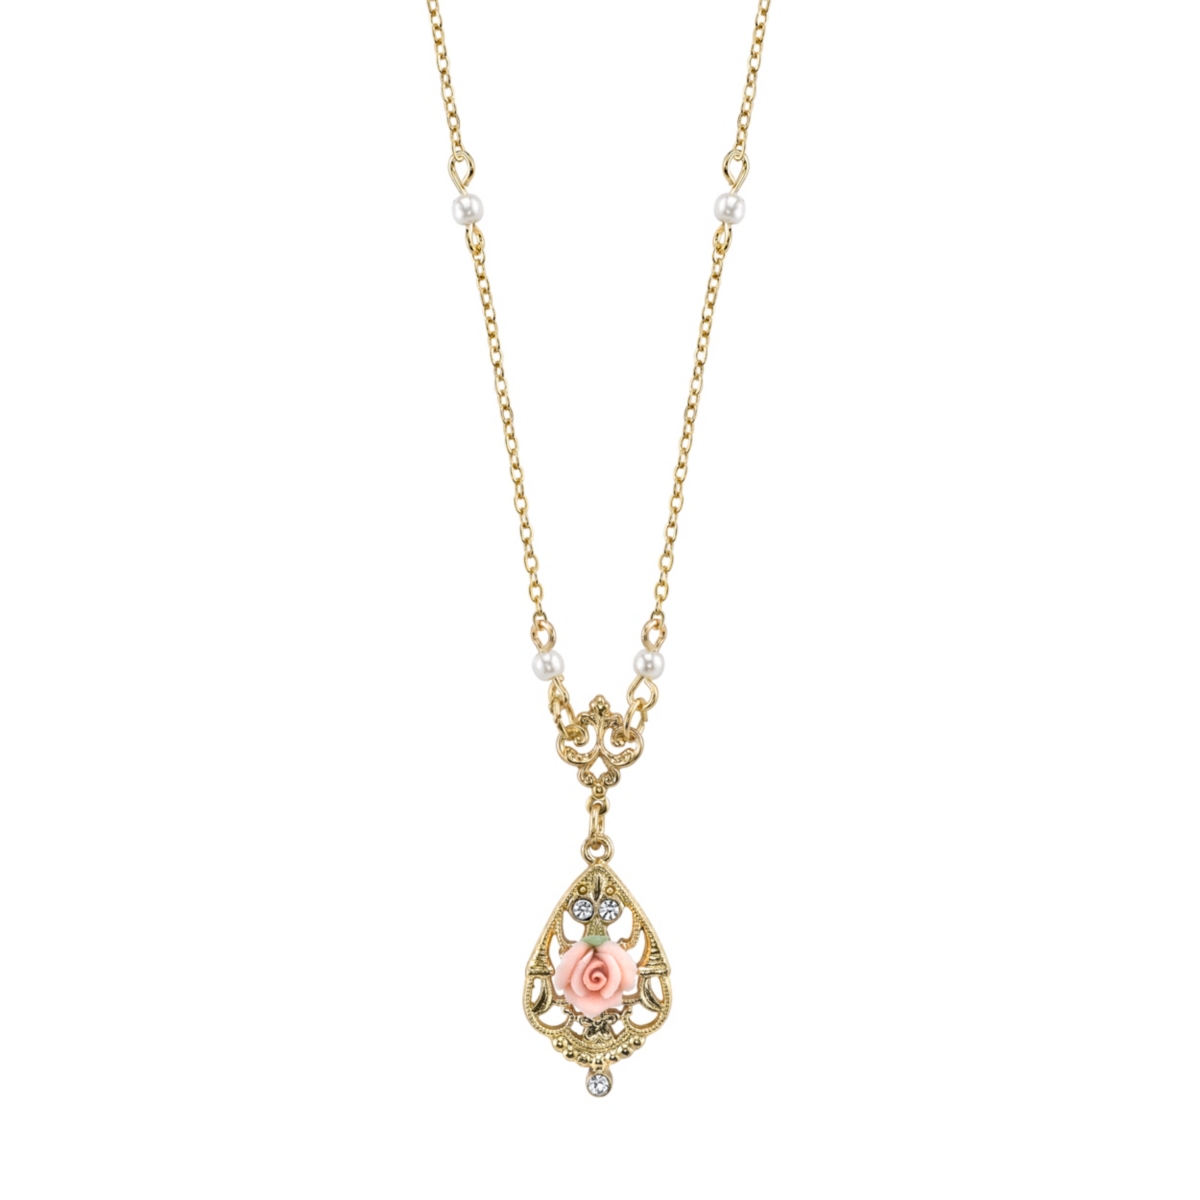 Edwardian Costume Jewelry  | 1900-1910s Necklaces, Rings, Earrings 2028 Gold-Tone Crystal and Pink Porcelain Rose Simulated Pearl Necklace 17 - Pink $25.20 AT vintagedancer.com